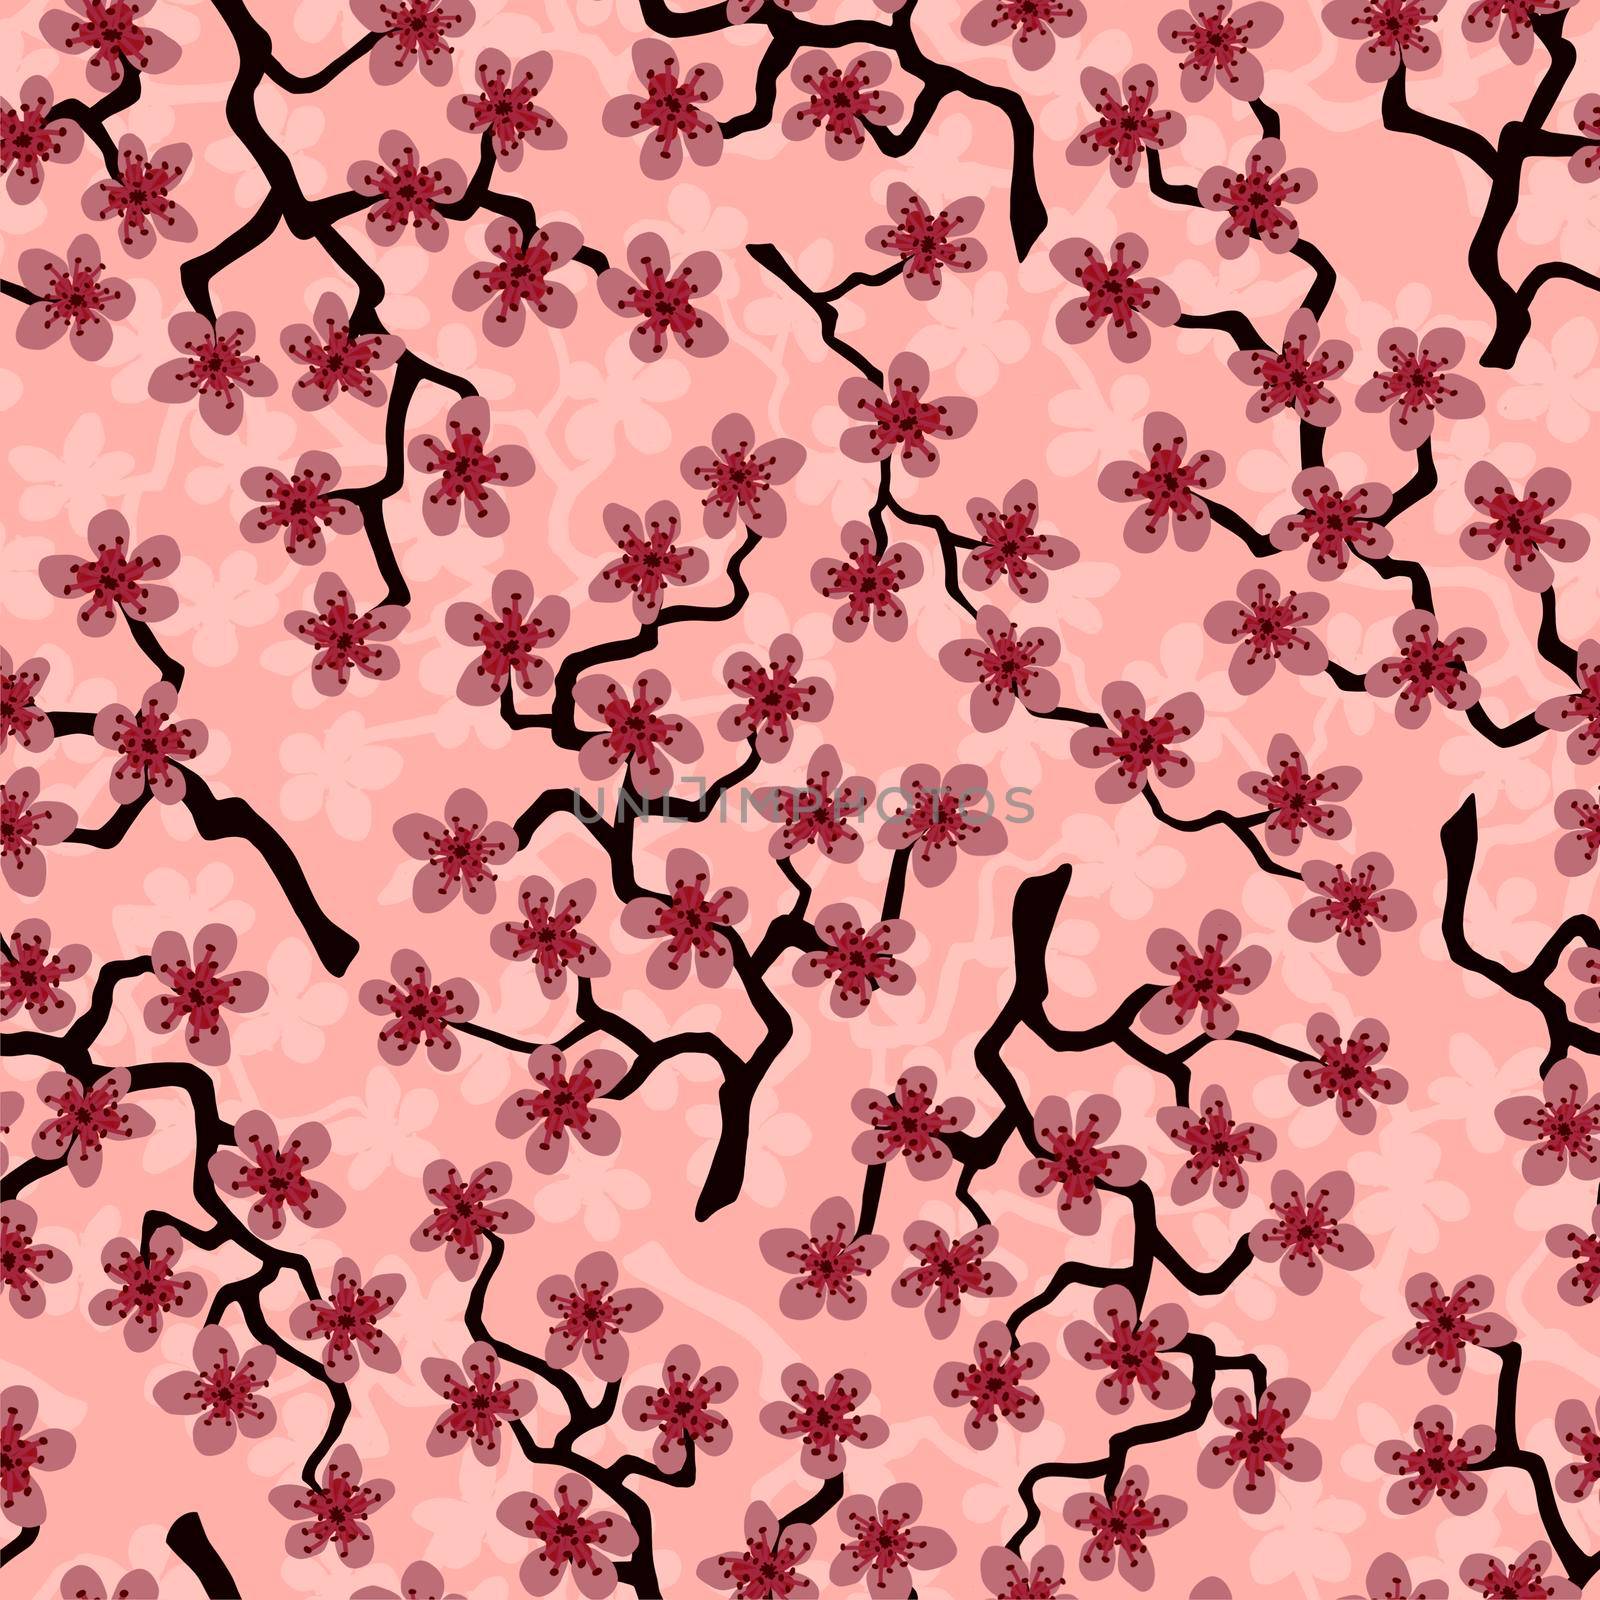 Seamless pattern with blossoming Japanese cherry sakura branches for fabric, packaging, wallpaper, textile decor, design, invitations, print, gift wrap, manufacturing.Pink flowers on coral background. by Angelsmoon